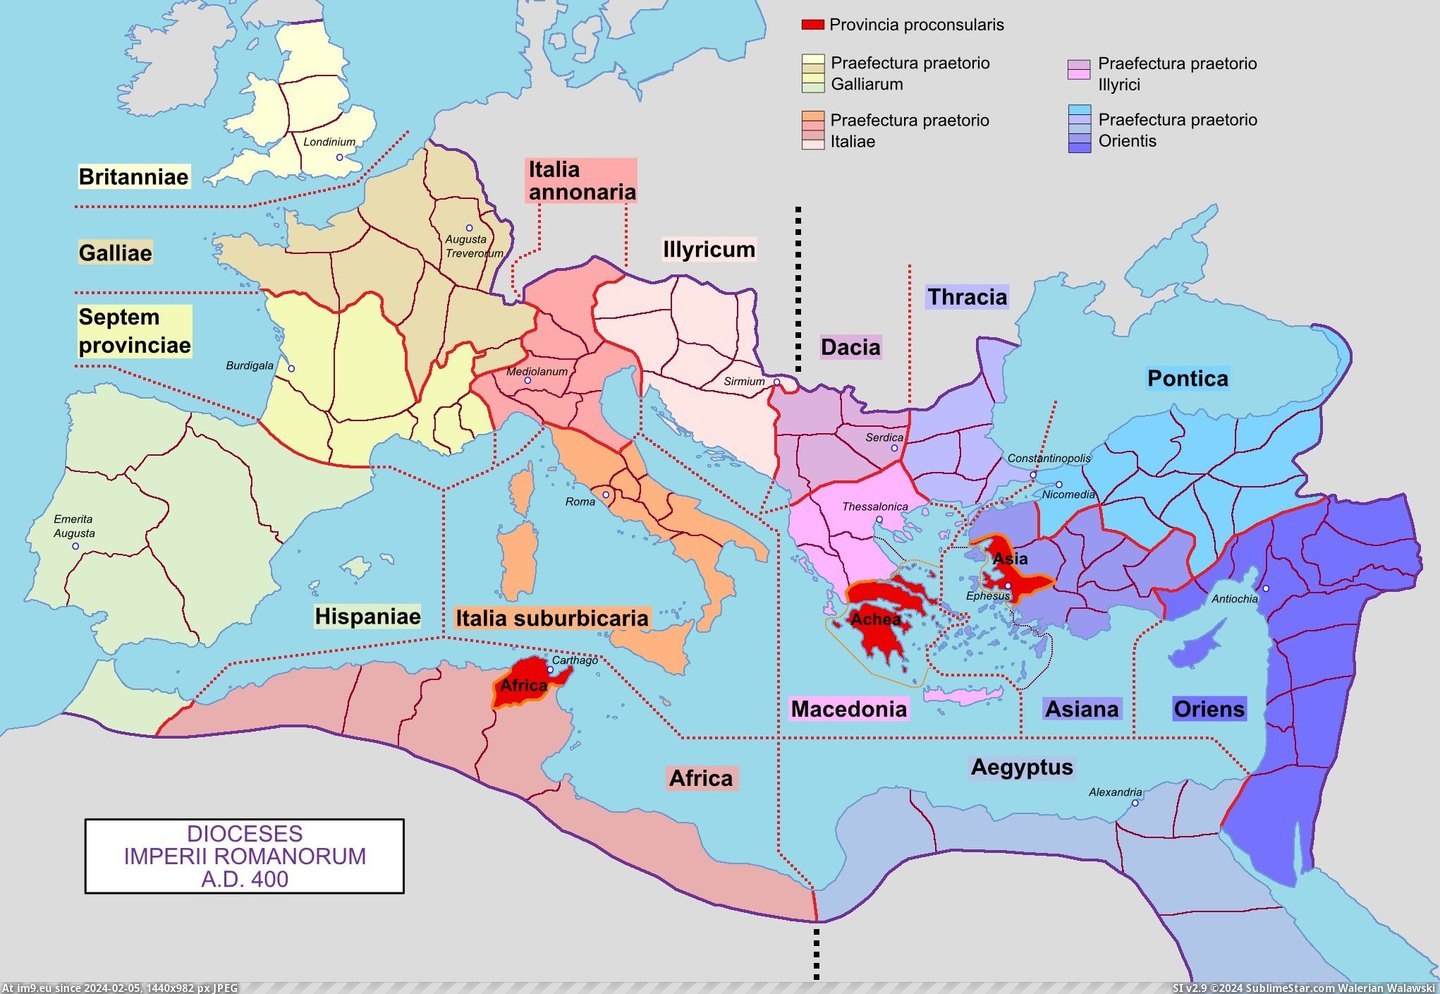 #Empire  #Roman [Mapporn] Dioceses of the Roman Empire in 400 AD [2042x1404] Pic. (Image of album My r/MAPS favs))